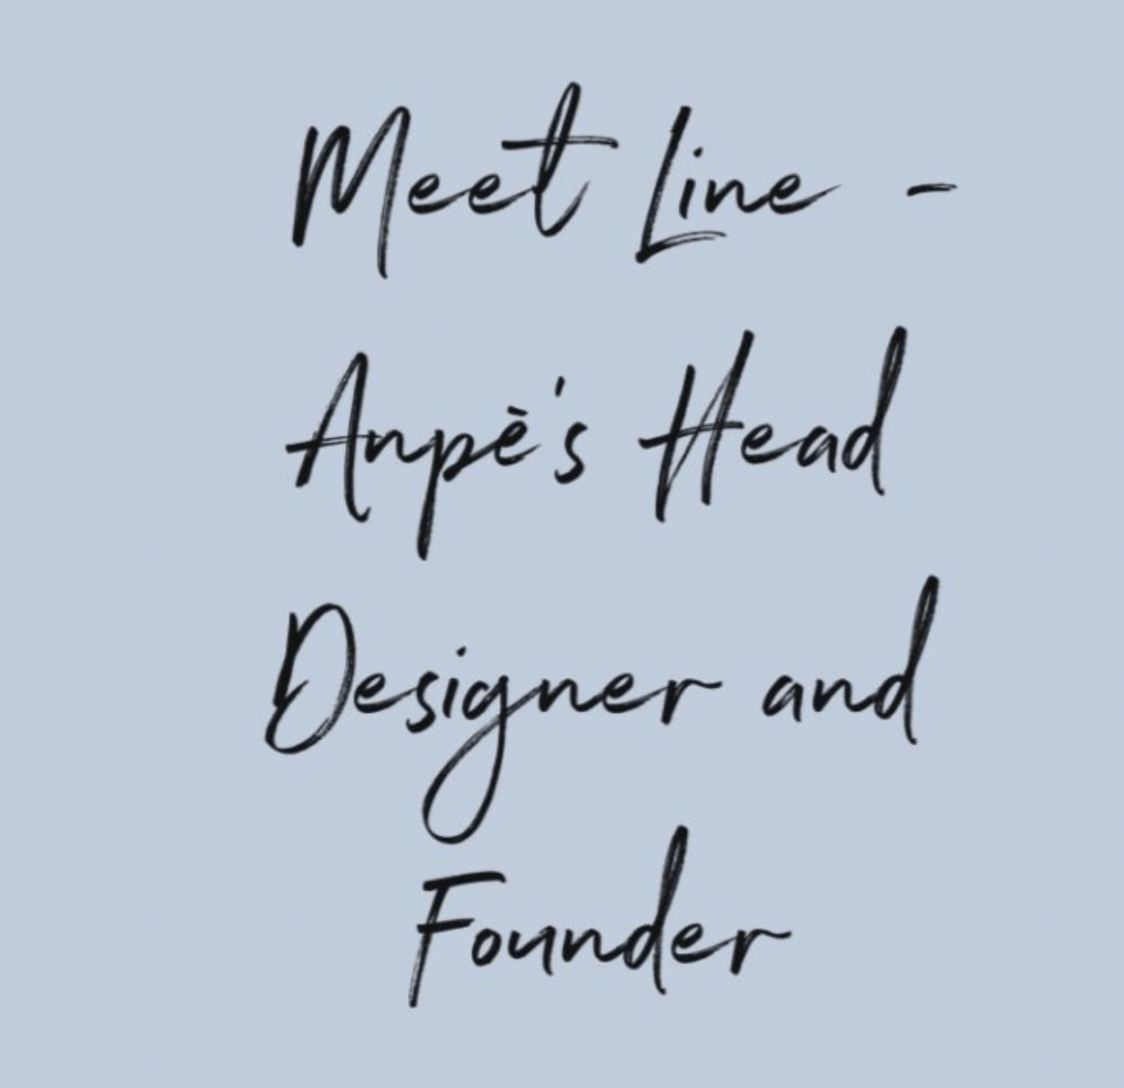 MEET LINE – THE HEAD DESIGNER AND FOUNDER OF ANPÉ ATELIER